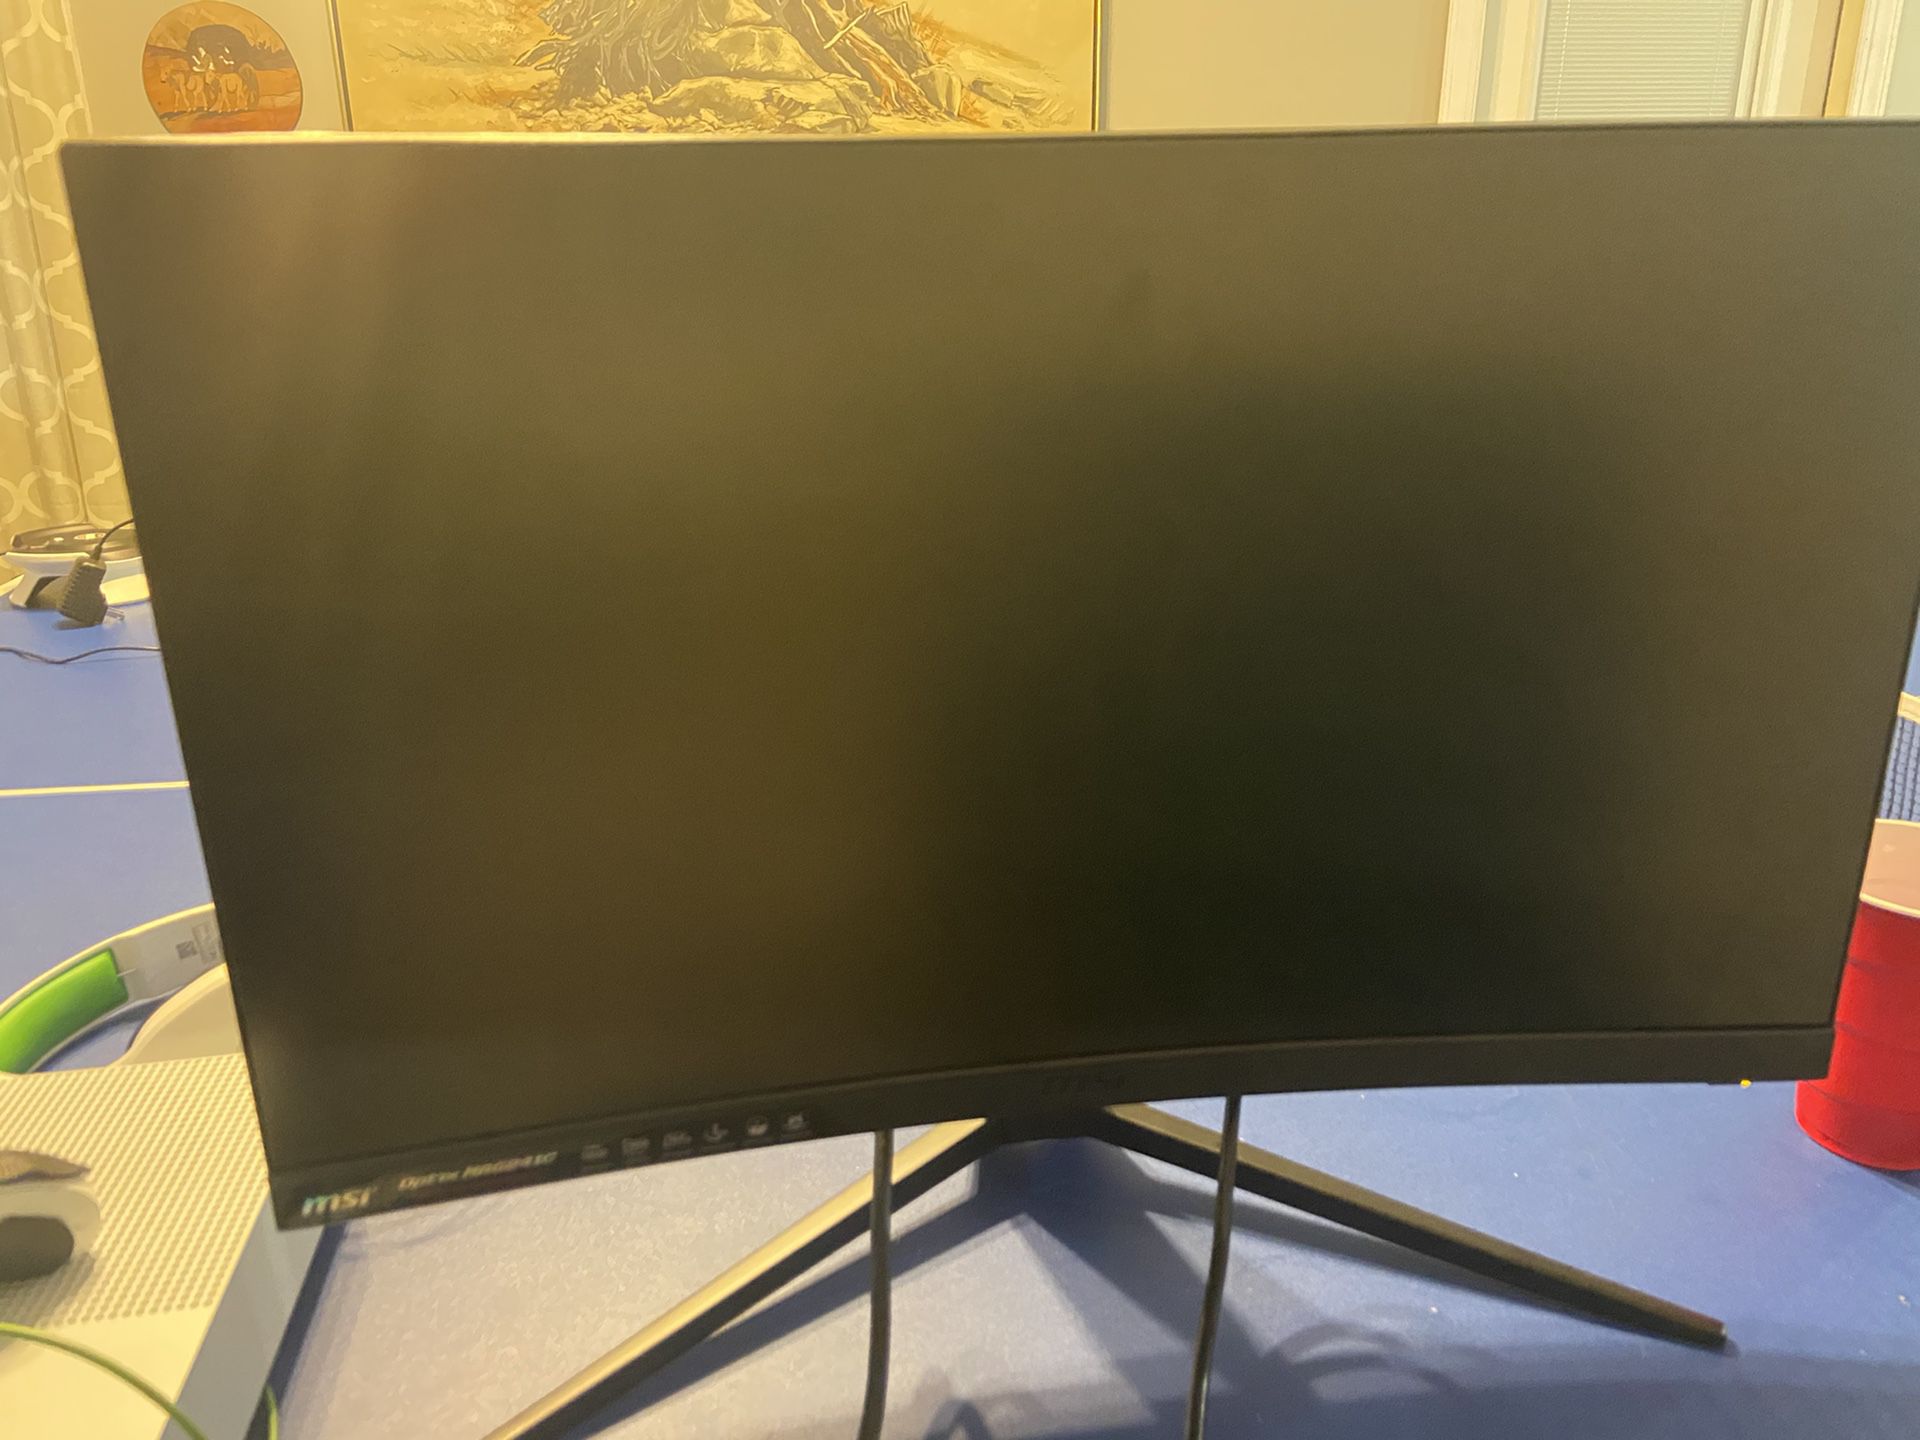 MSI curved gaming monitor 24”